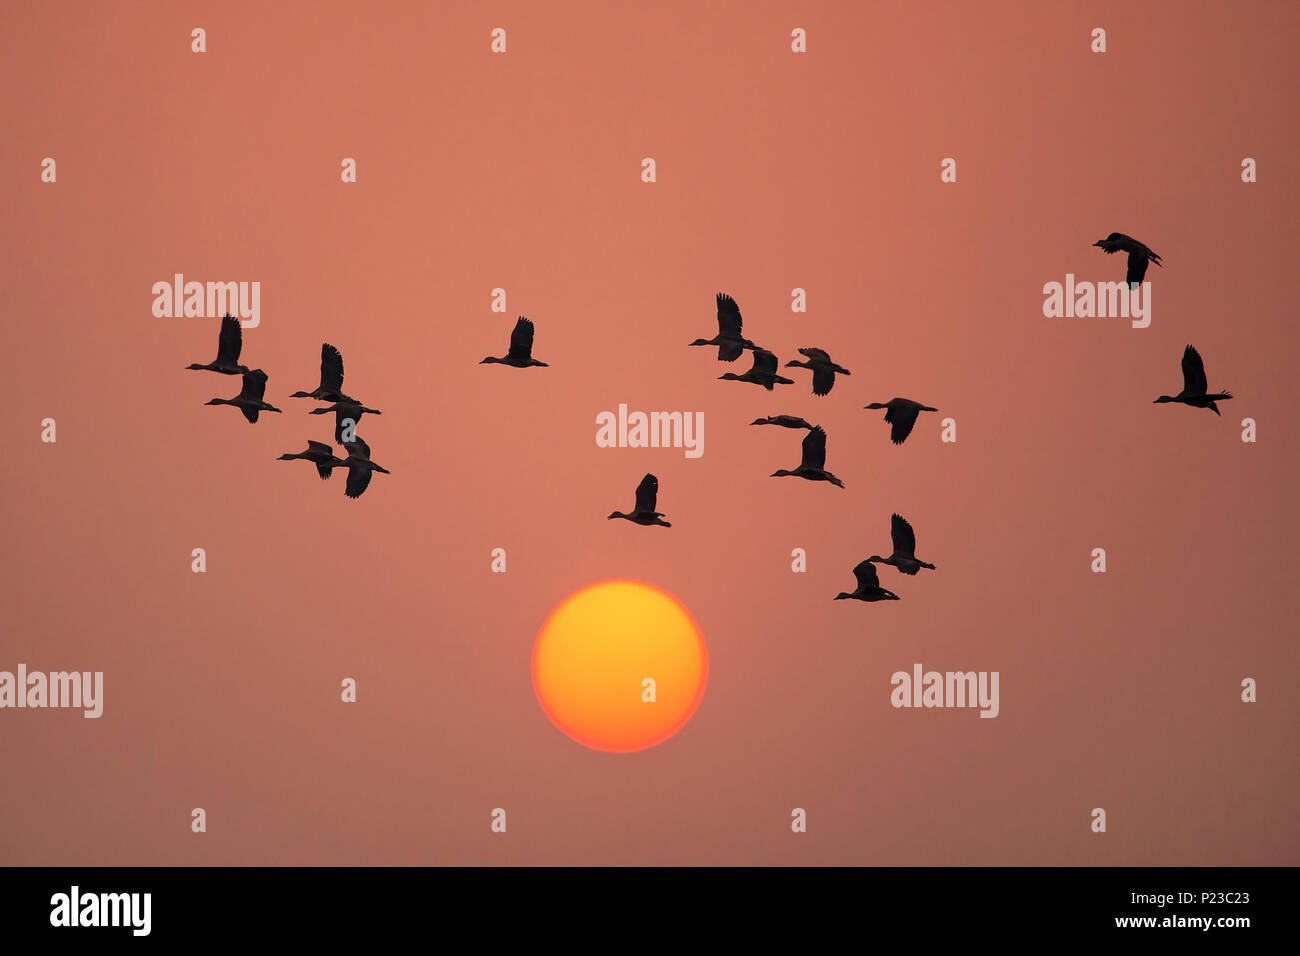 Silhouetted Lesser whistling ducks flying at sunset in Keoladeo Ghana National Park, Bharatpur, India. Stock Photo